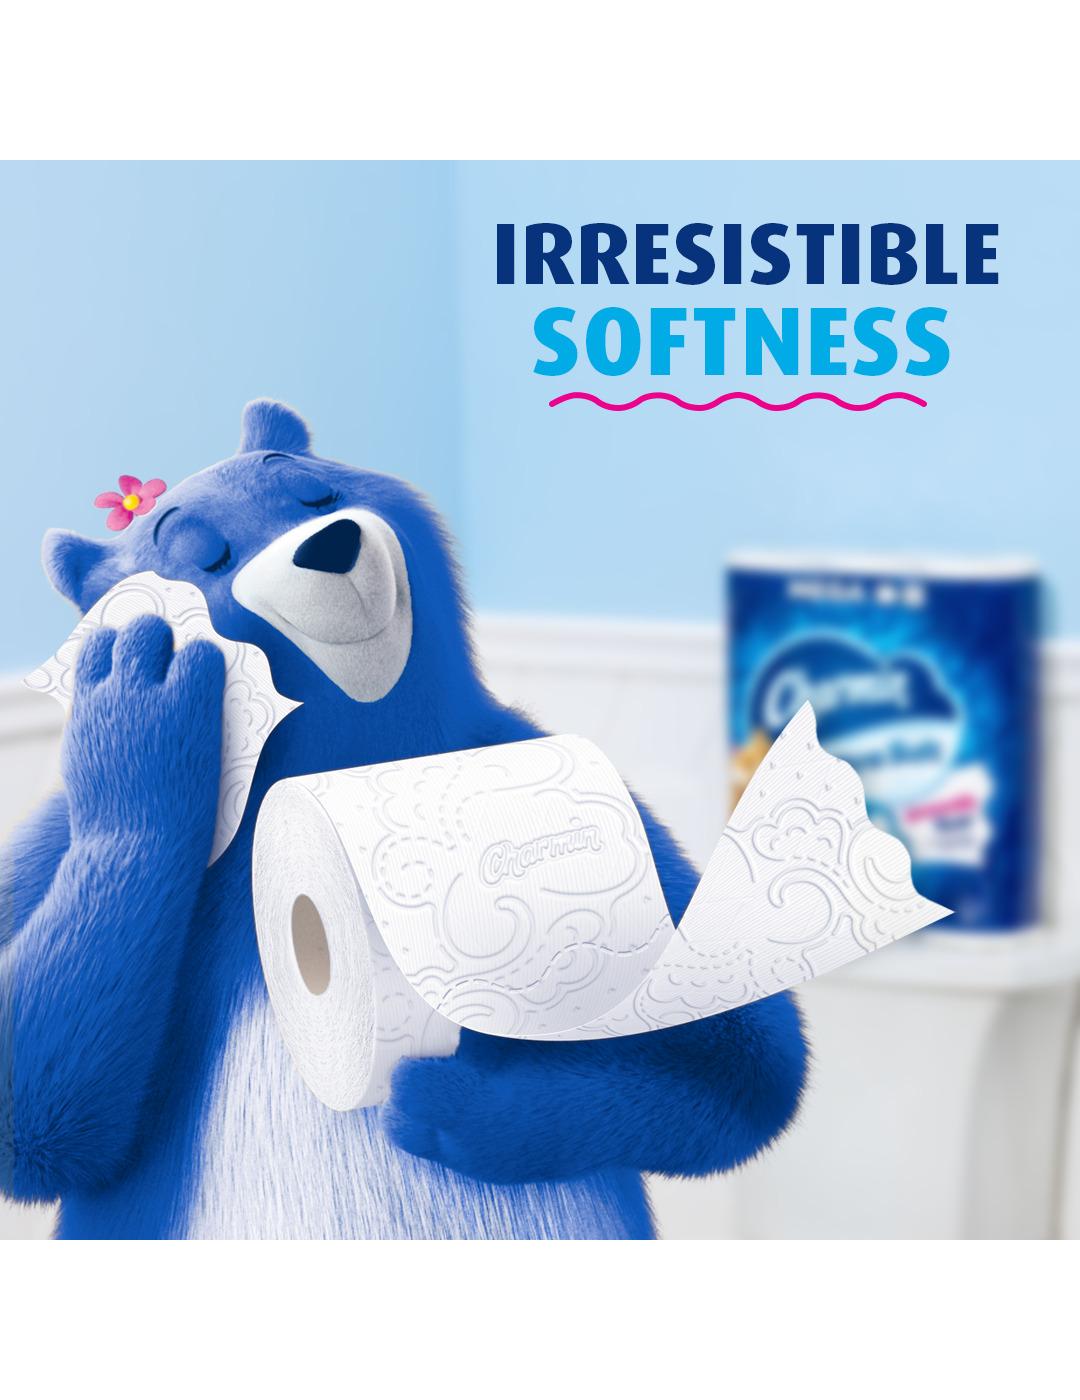 Charmin Ultra Soft Toilet Paper; image 6 of 20